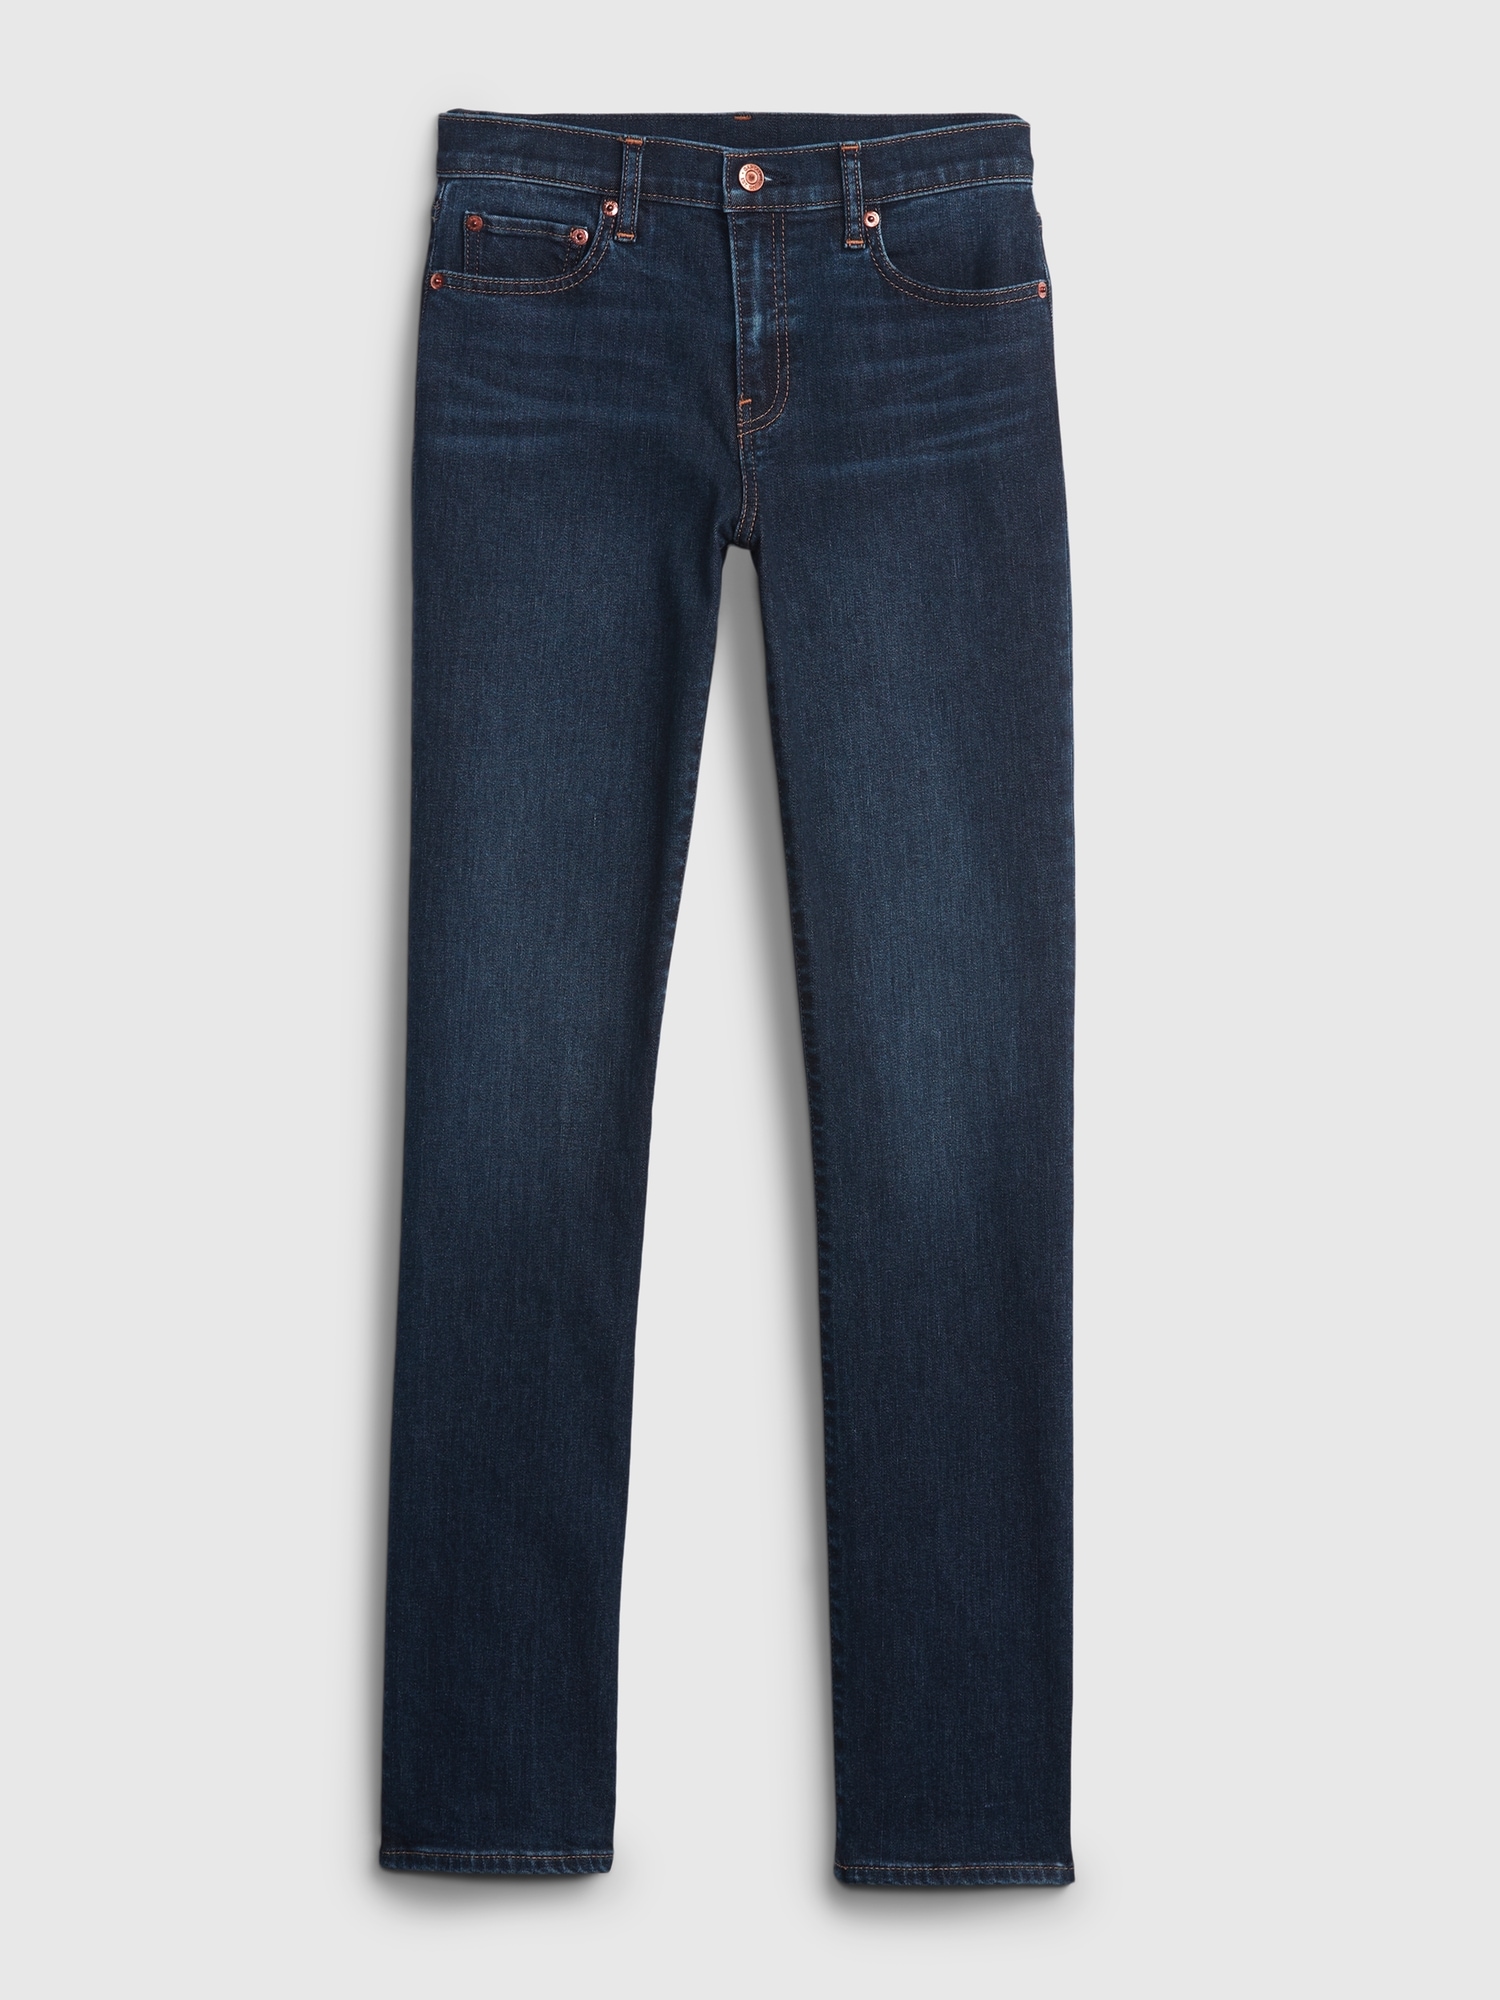 Best Selling And Most Flattering GAP Jeans For Women Over 45! (All Under  $80) 